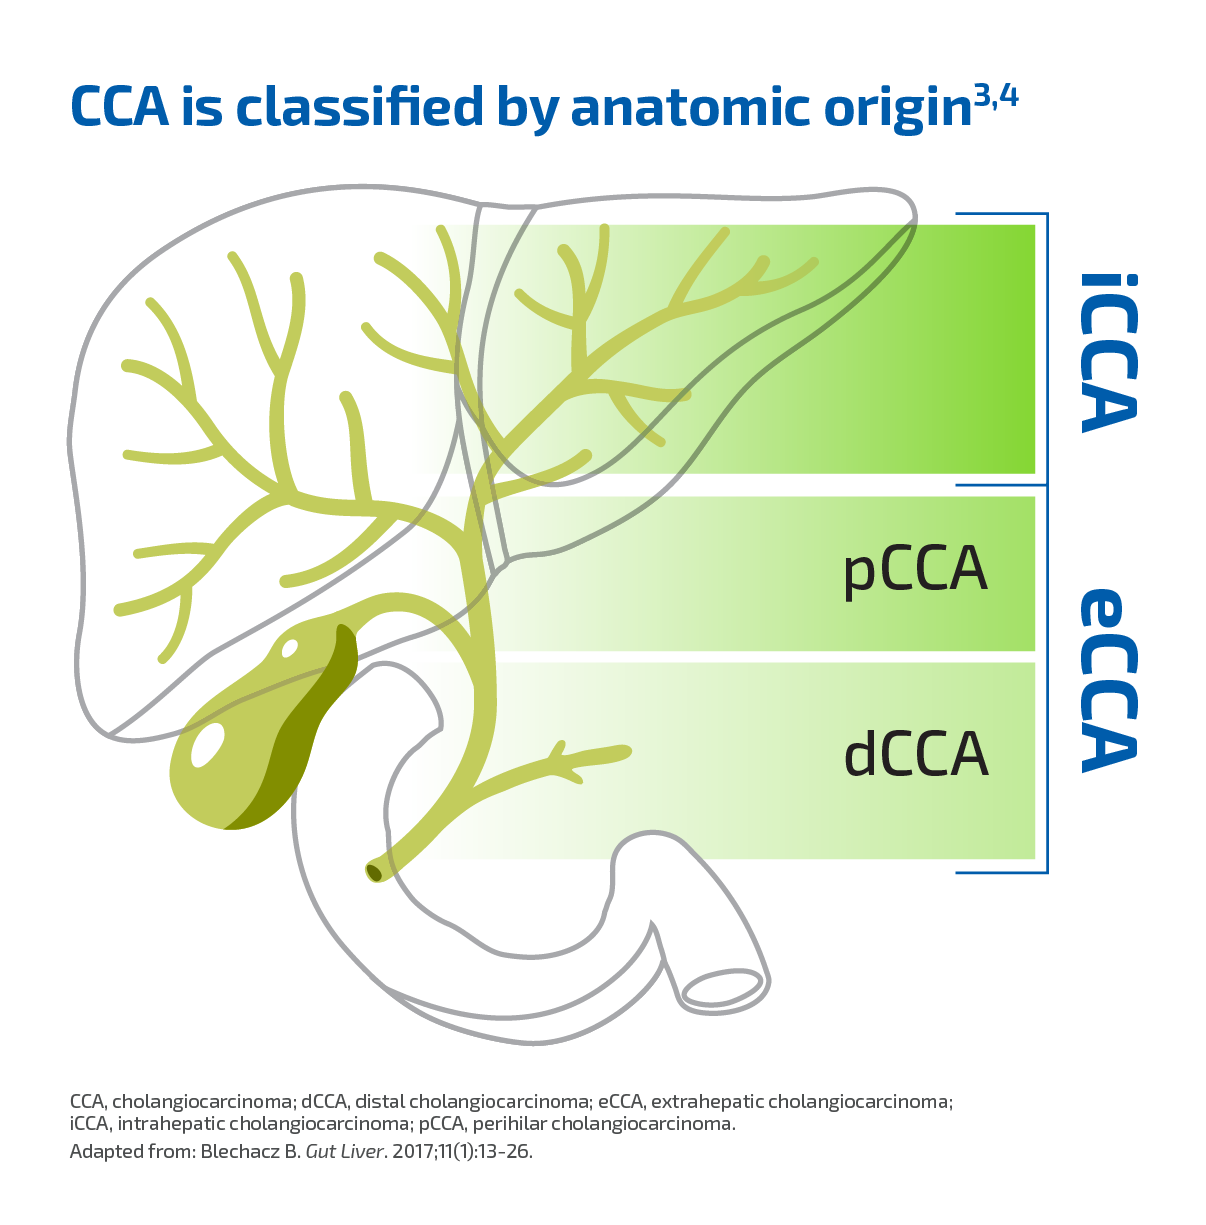 CCA can be classified into 3 anatomic subtypes